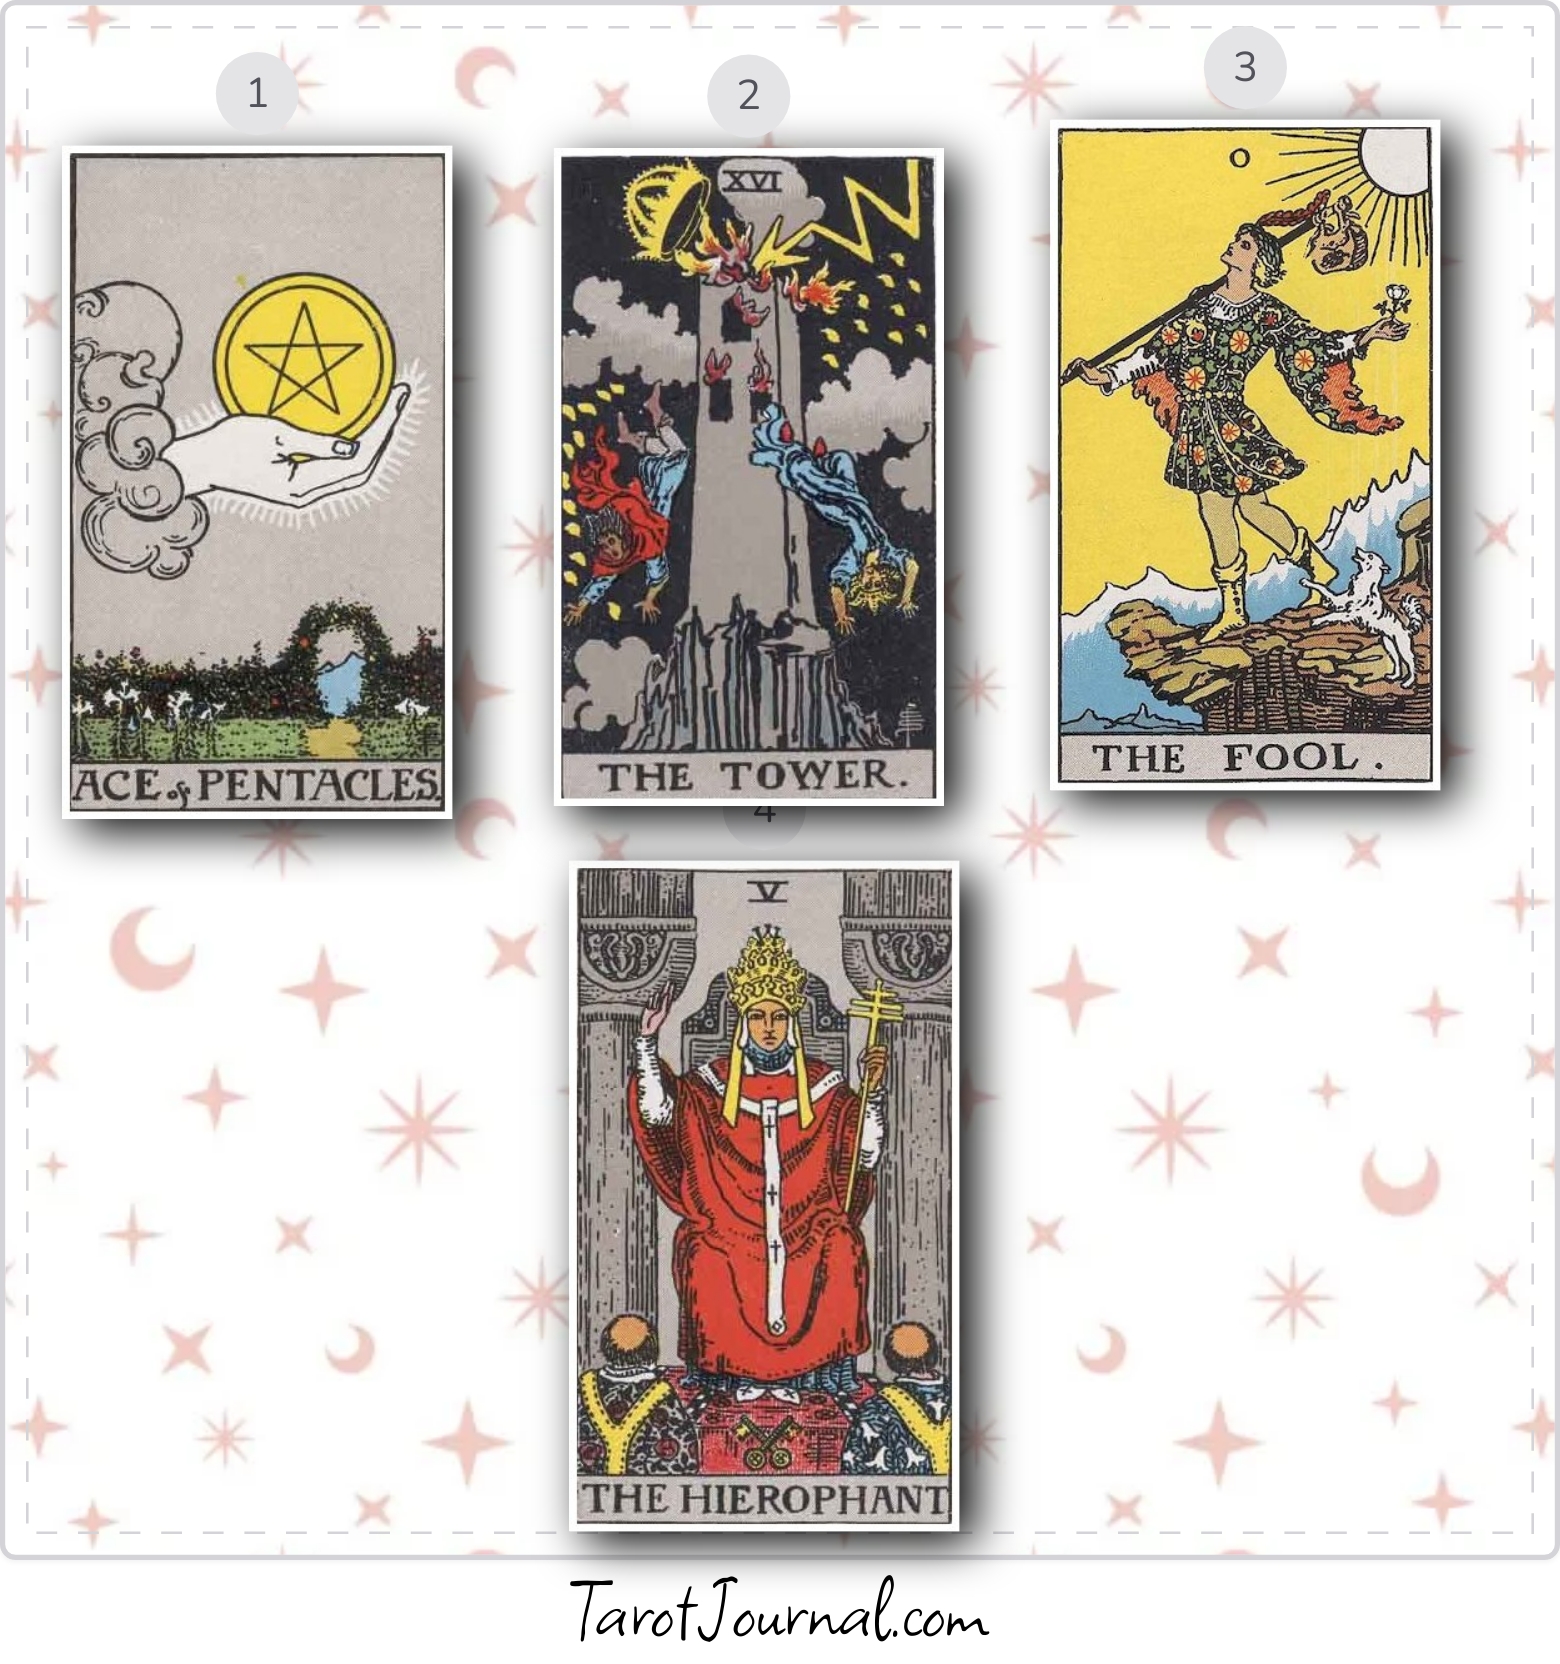 What changed in his mind - tarot reading by Kristin M Johnson